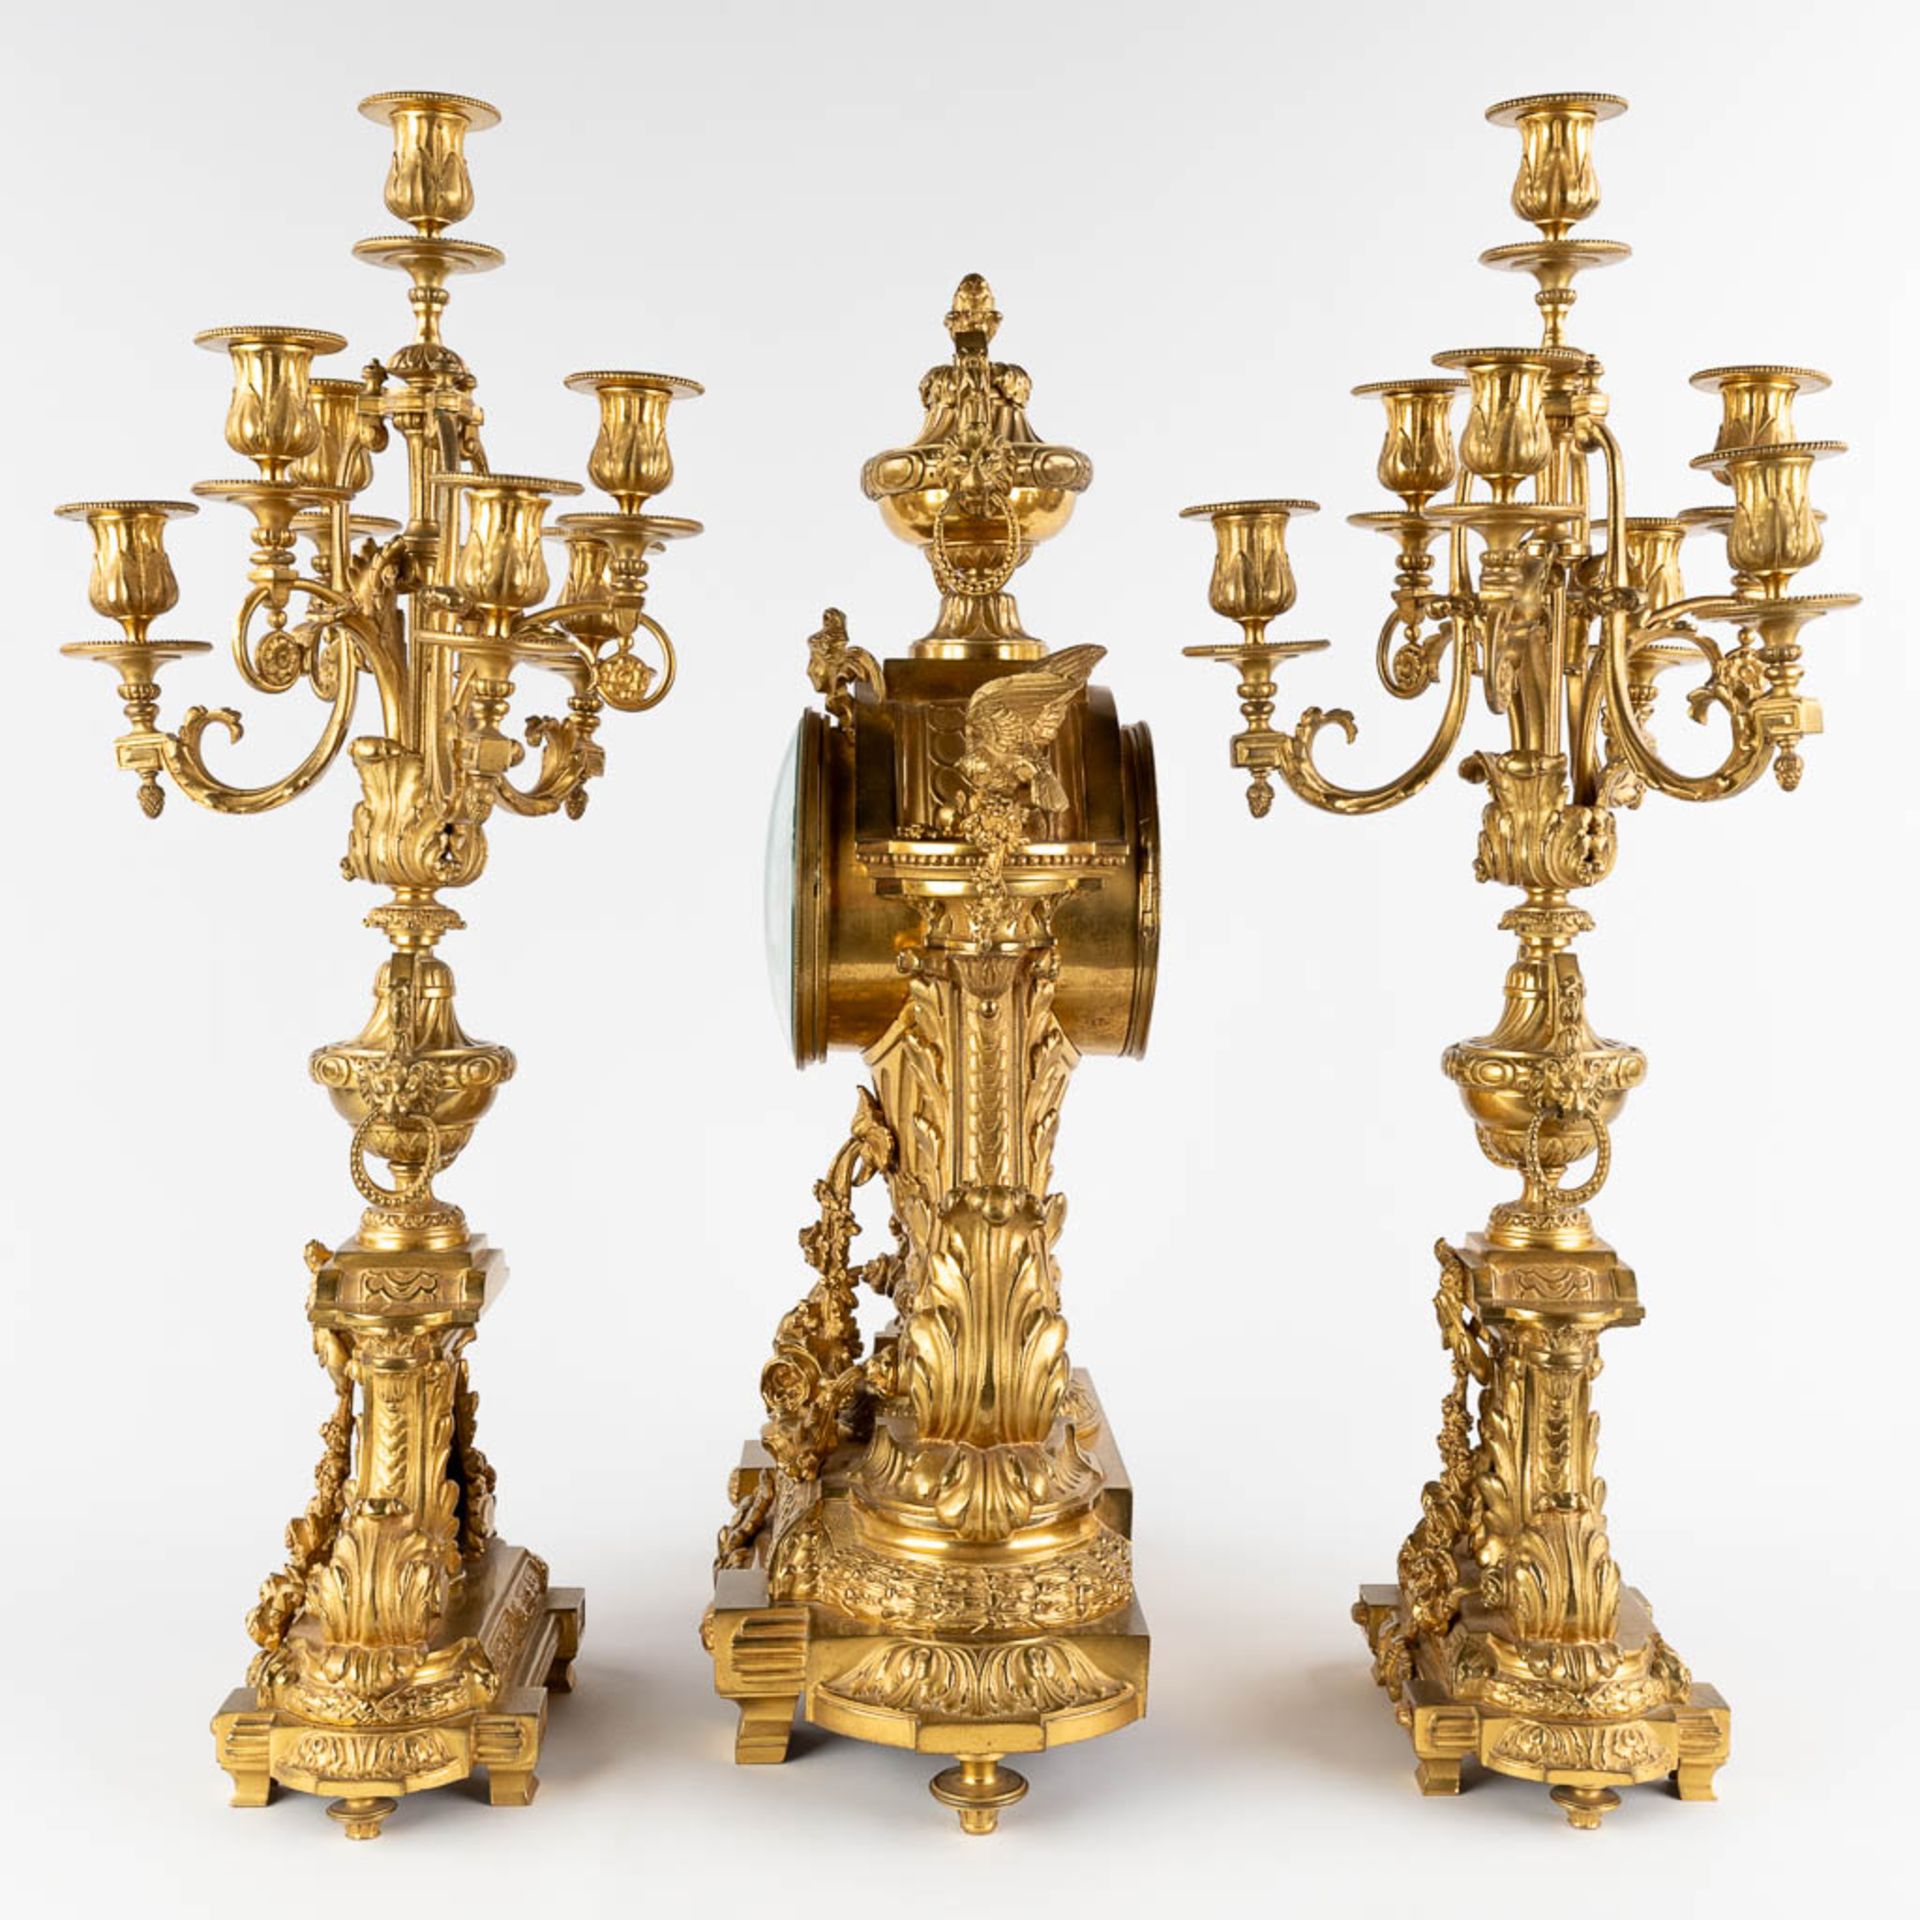 A three-piece mantle garniture clock and candelabra, gilt bronze in a Louis XVI style, 19th C. (D:19 - Image 8 of 19